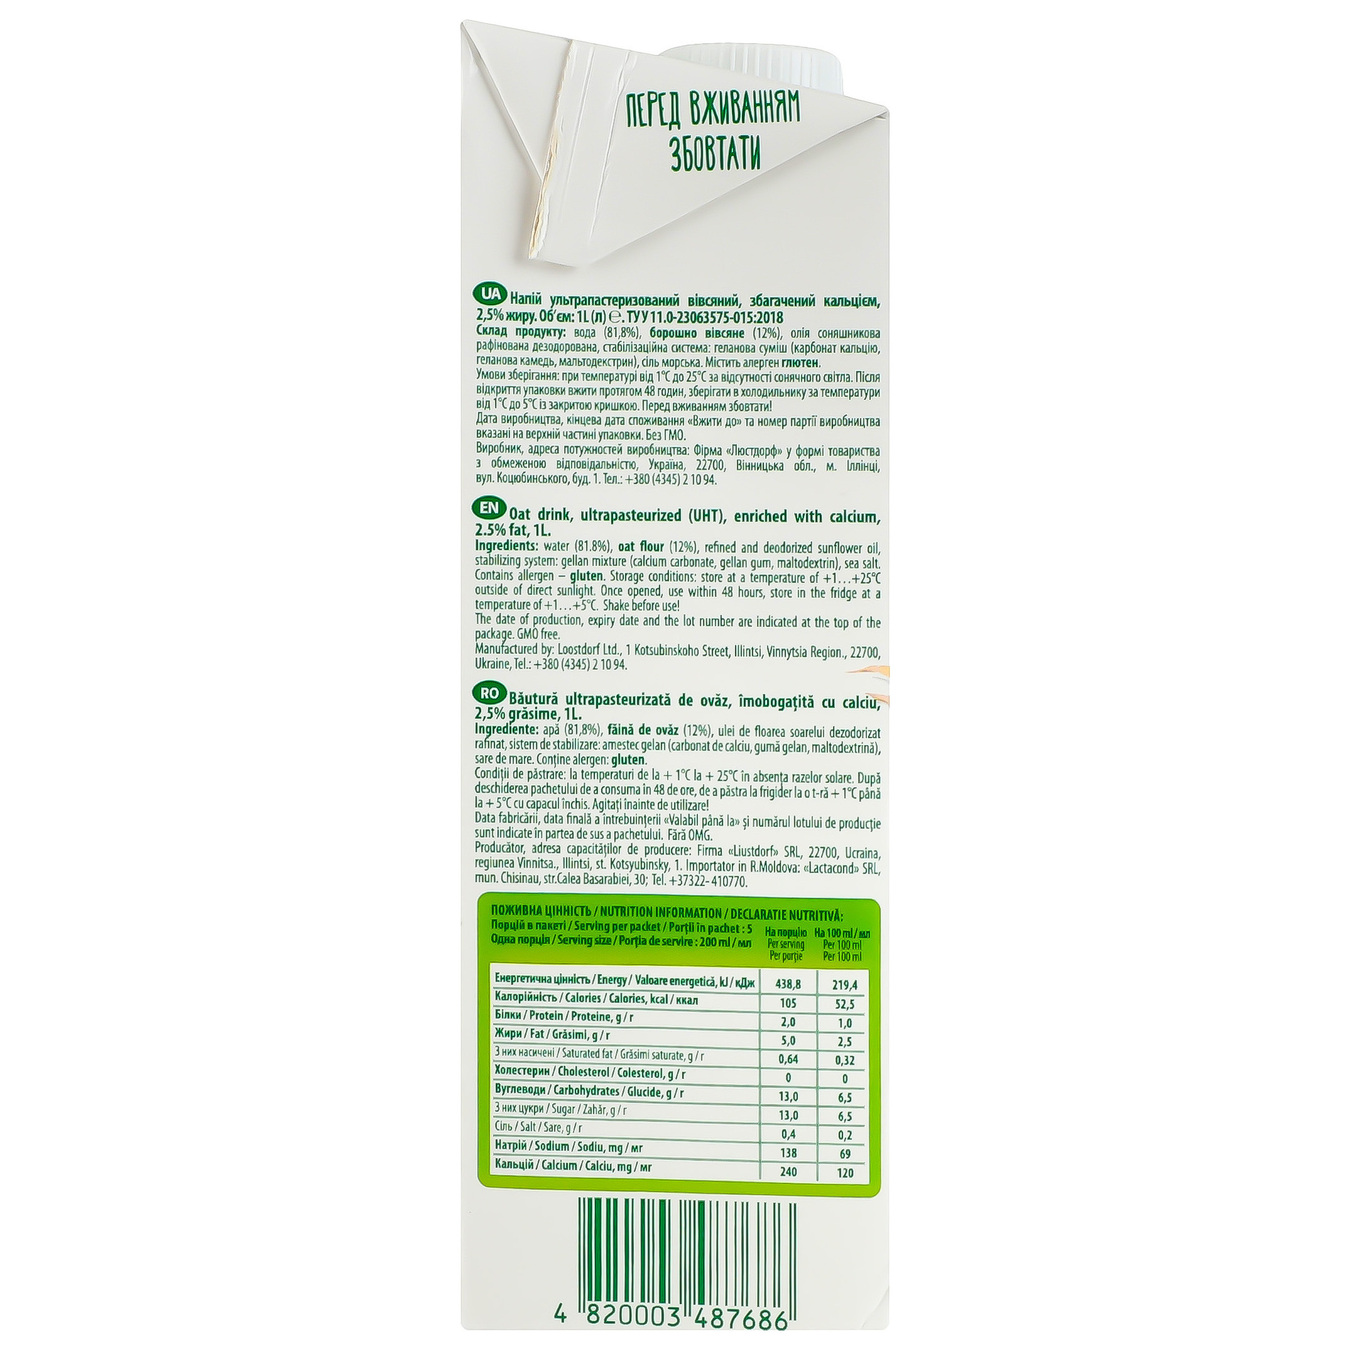 Green Smile Oatmeal drink Oat ultra-pasteurized enriched with calcium 2.5% 1l 4